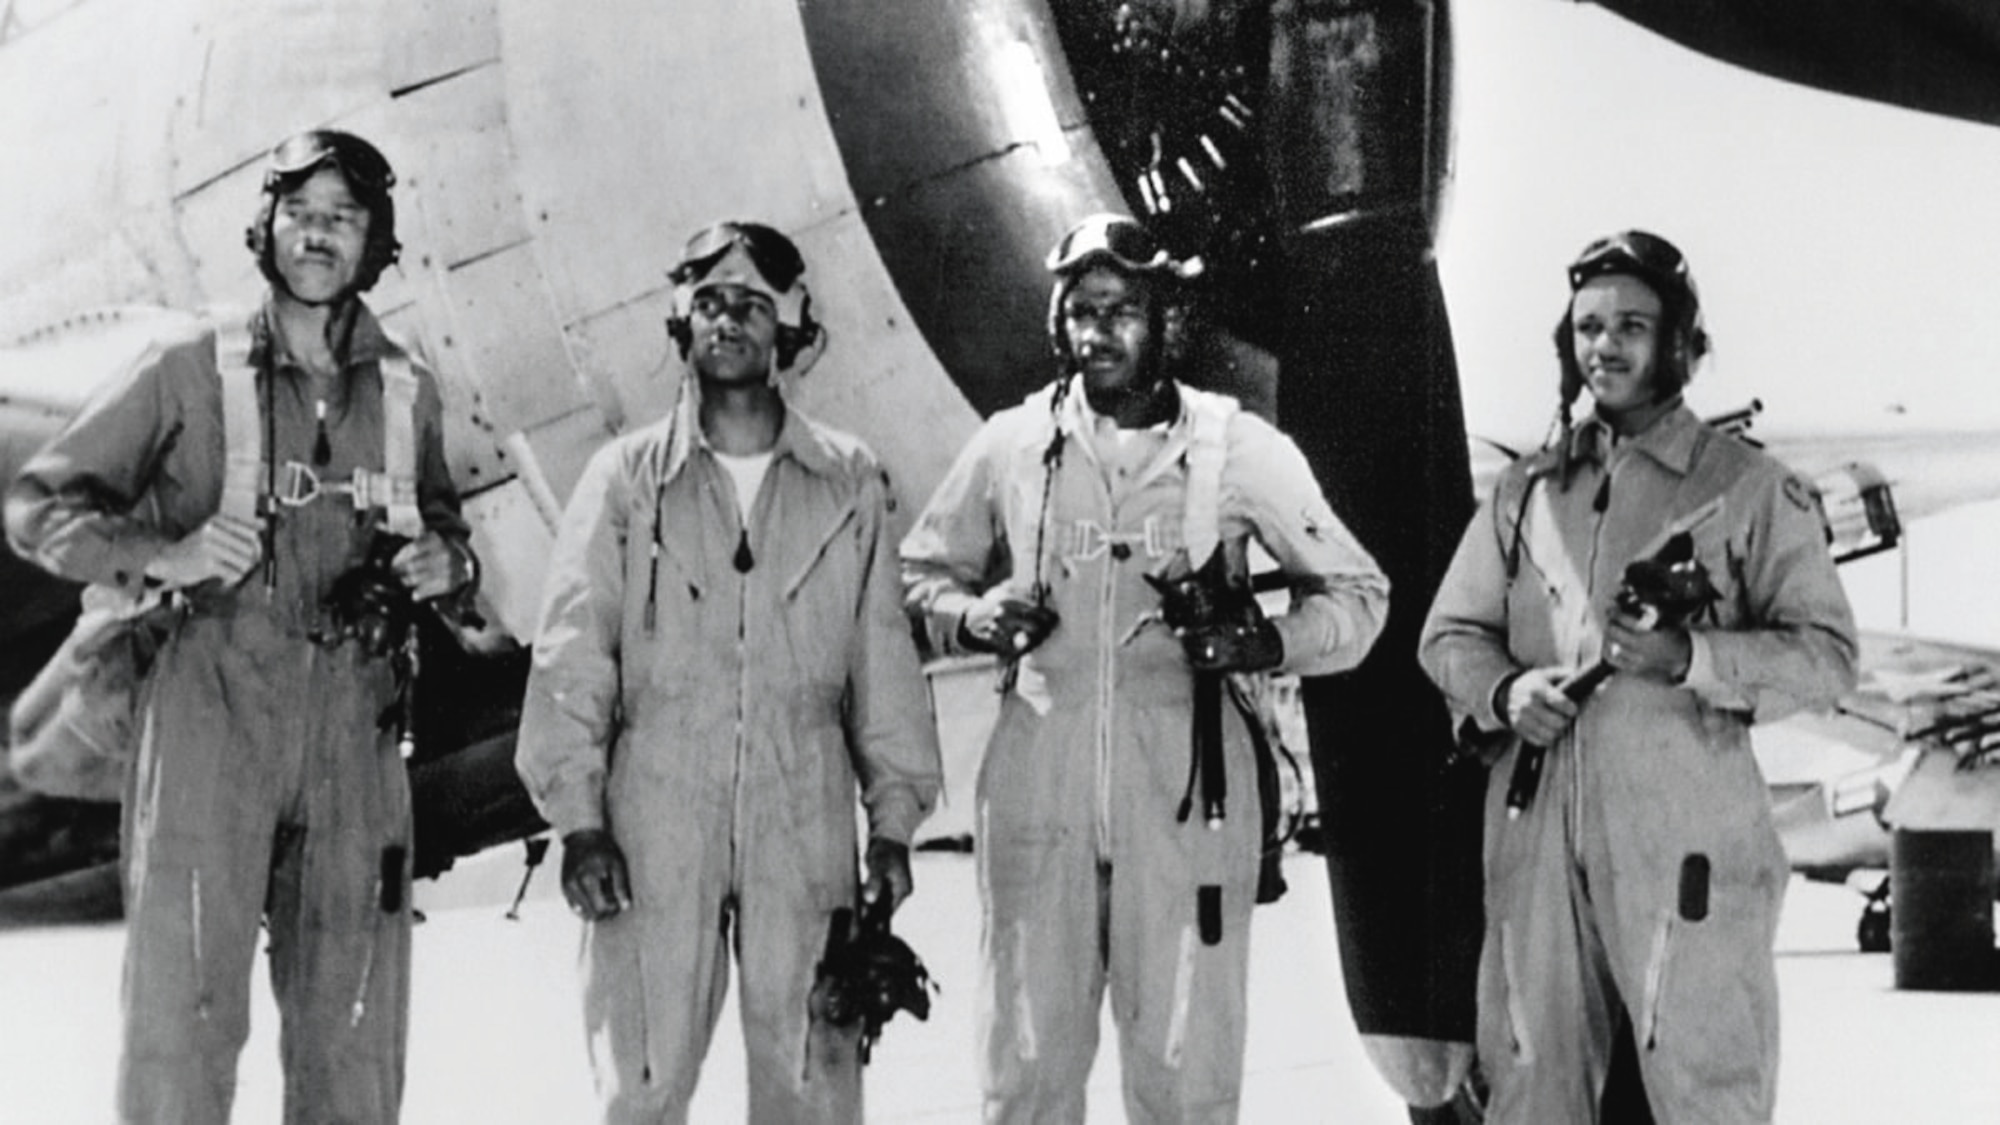 Pilots in front of plane